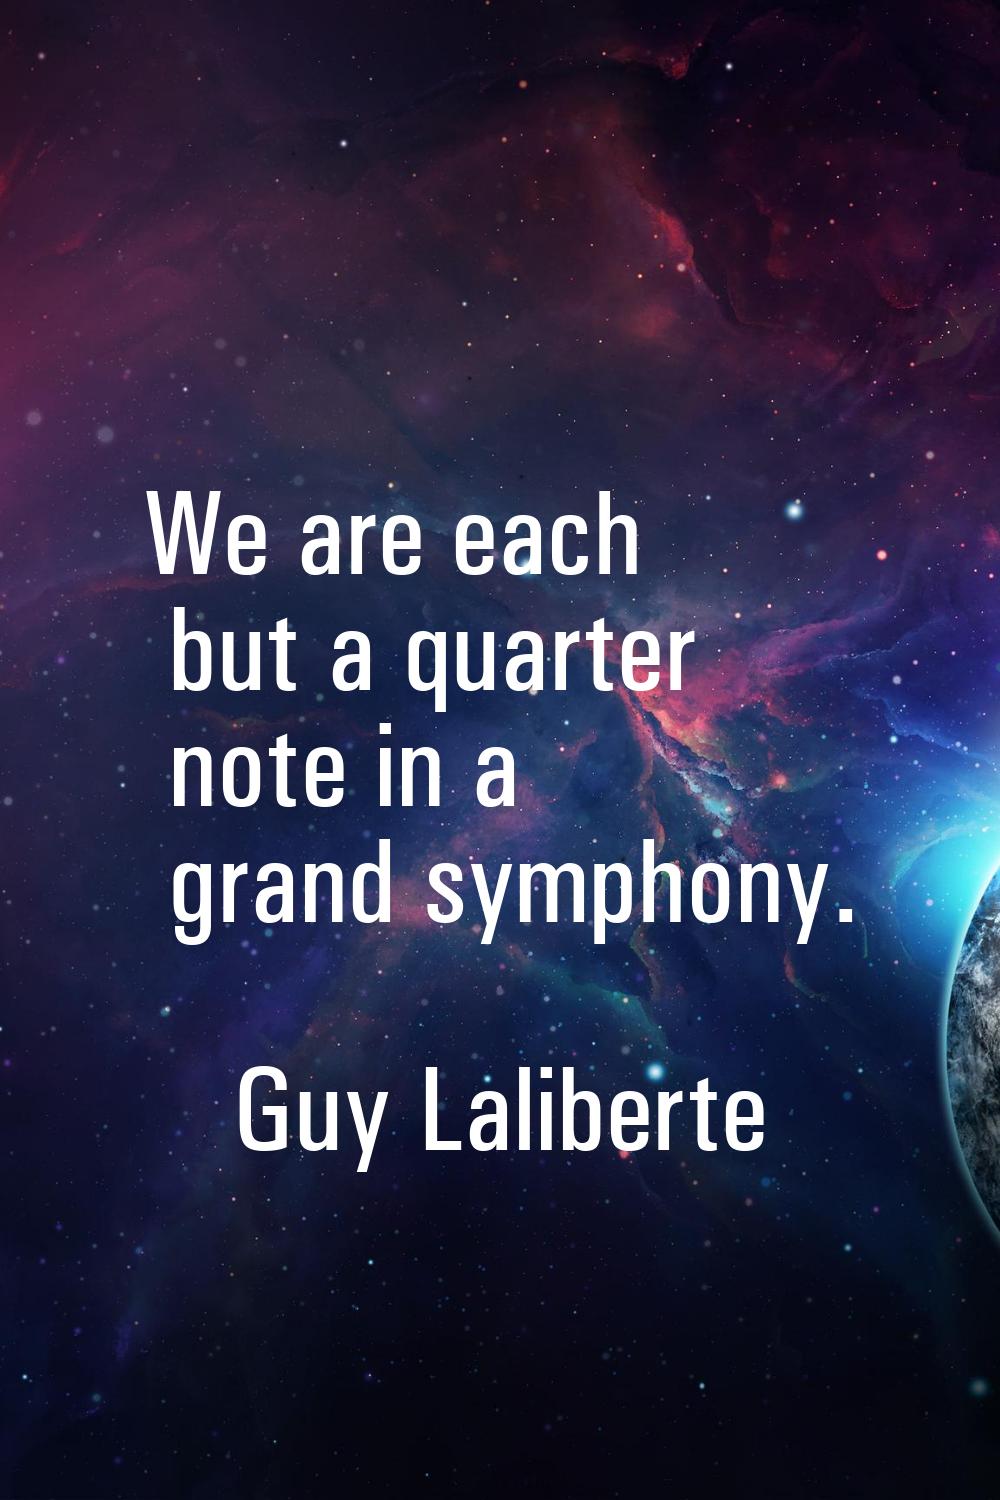 We are each but a quarter note in a grand symphony.